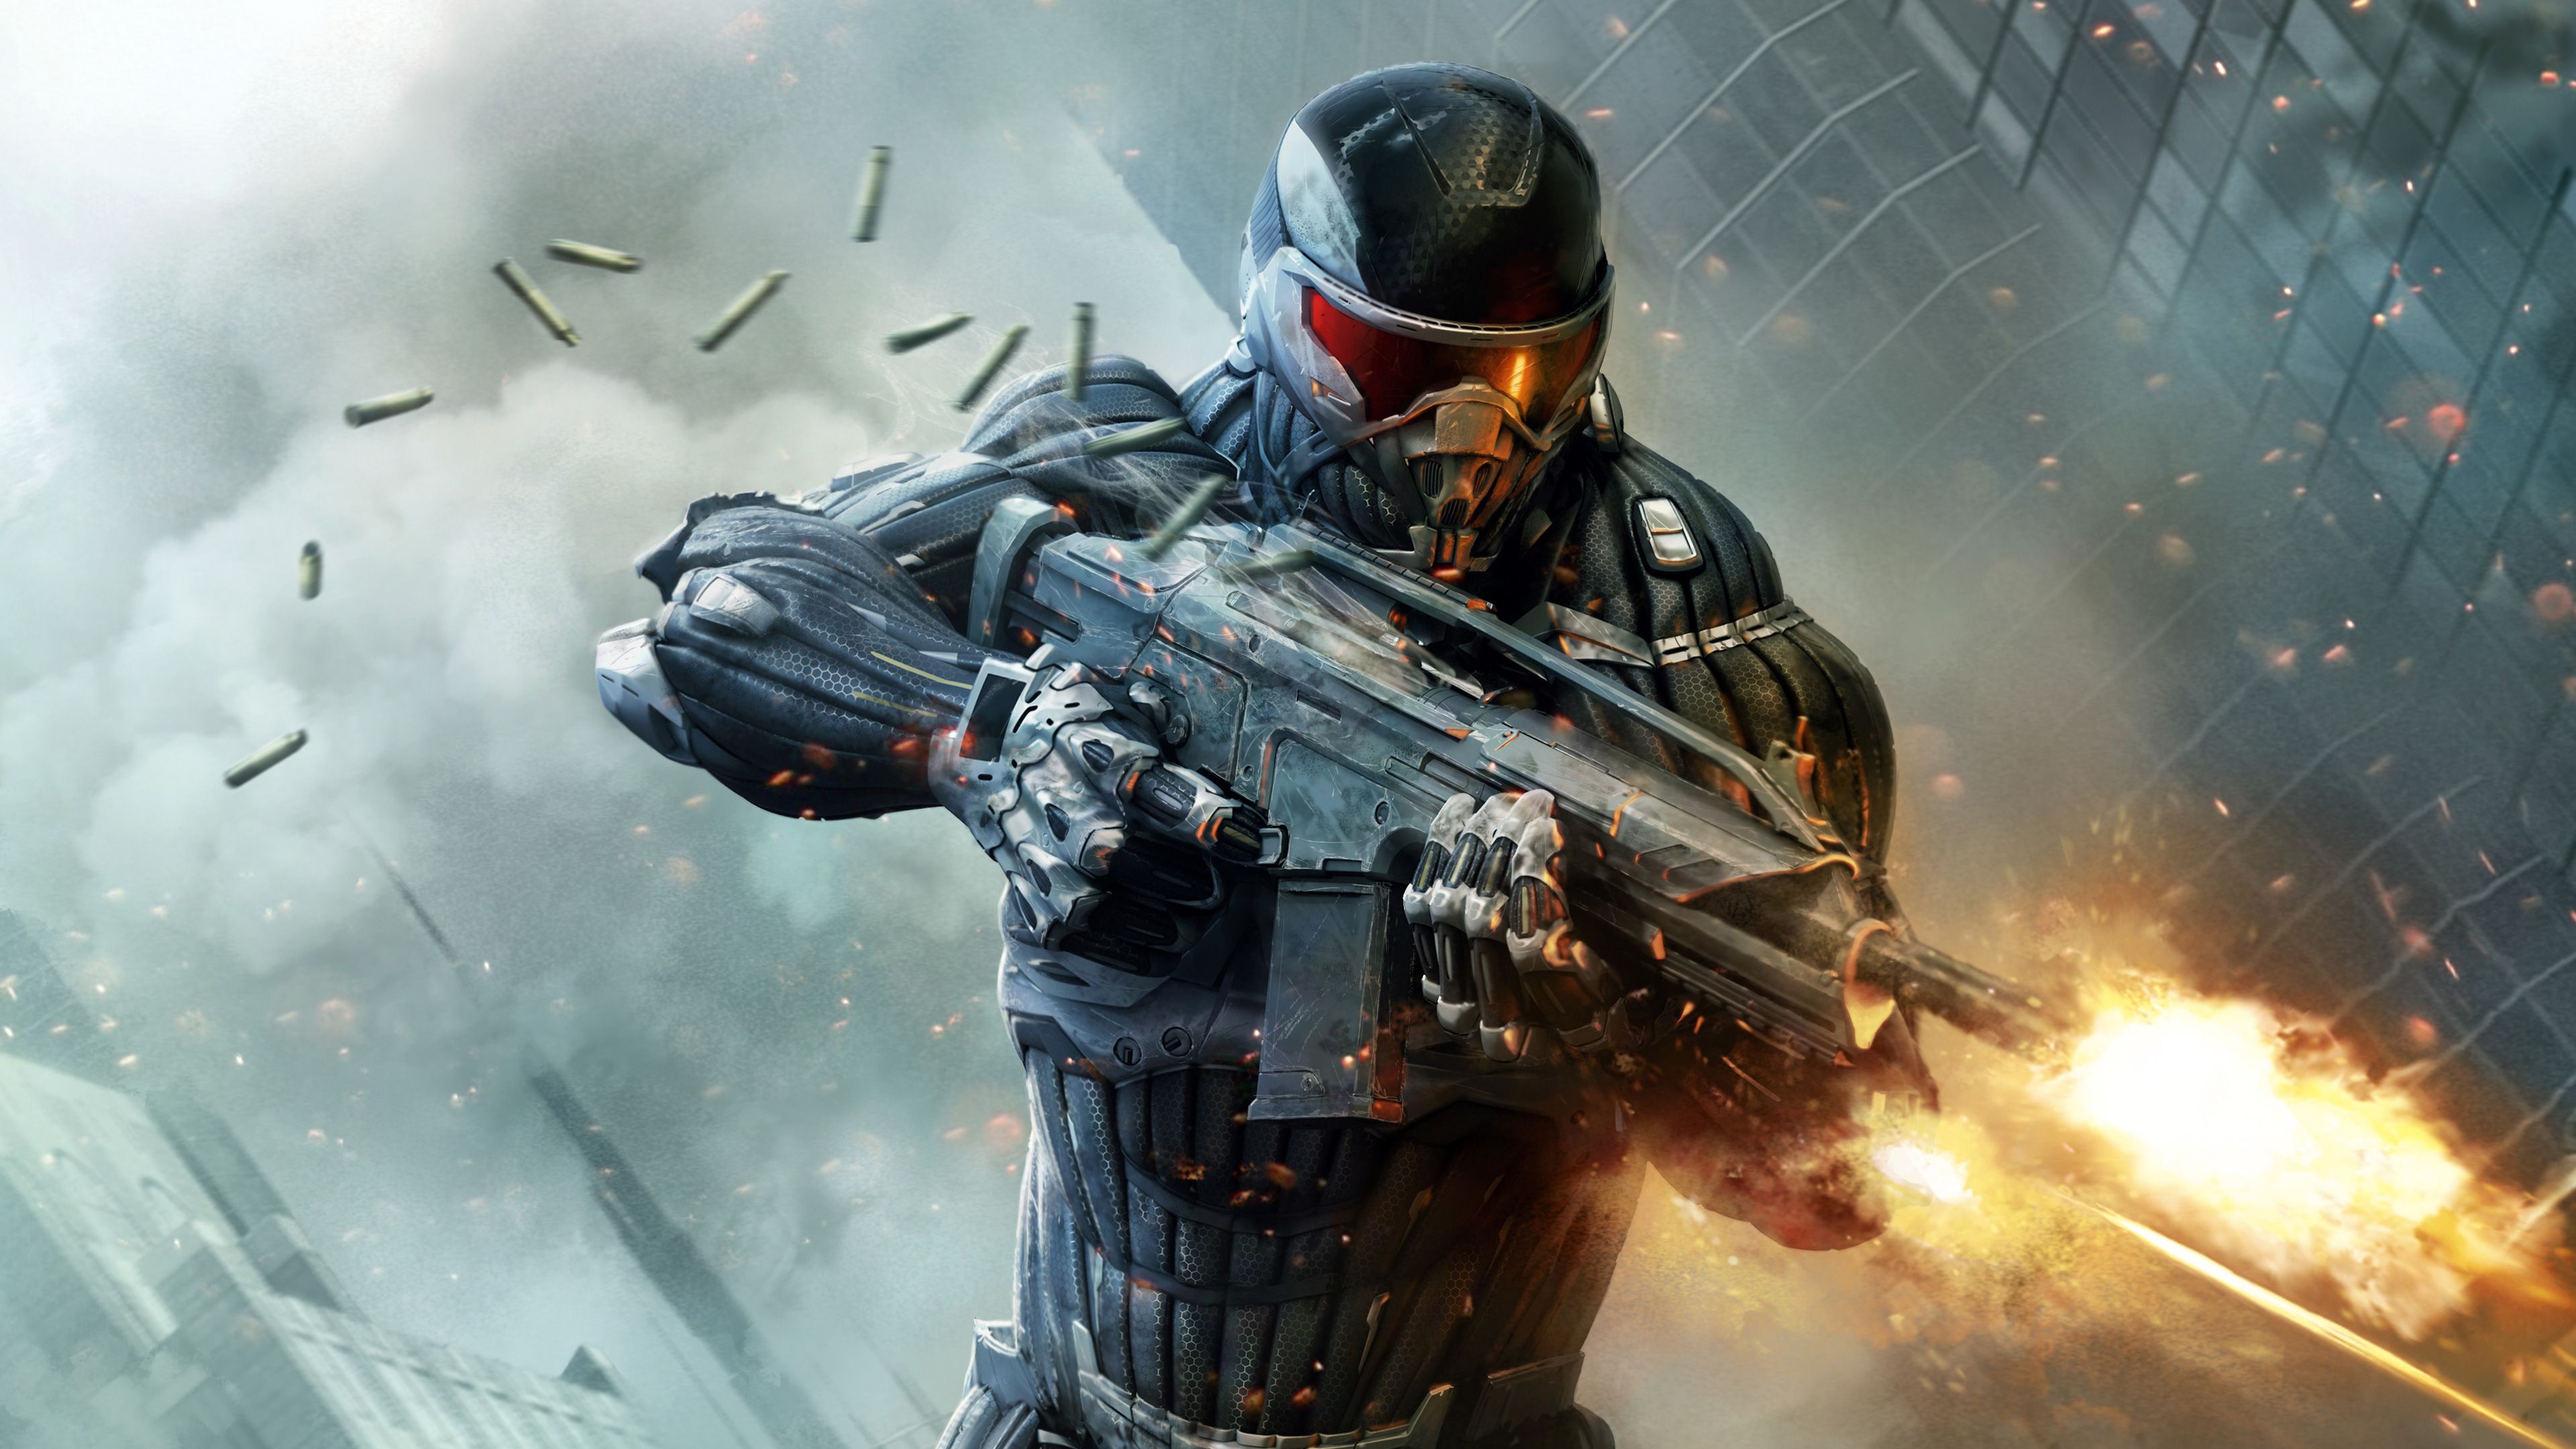 Crysis 3 Remastered Update 1.02